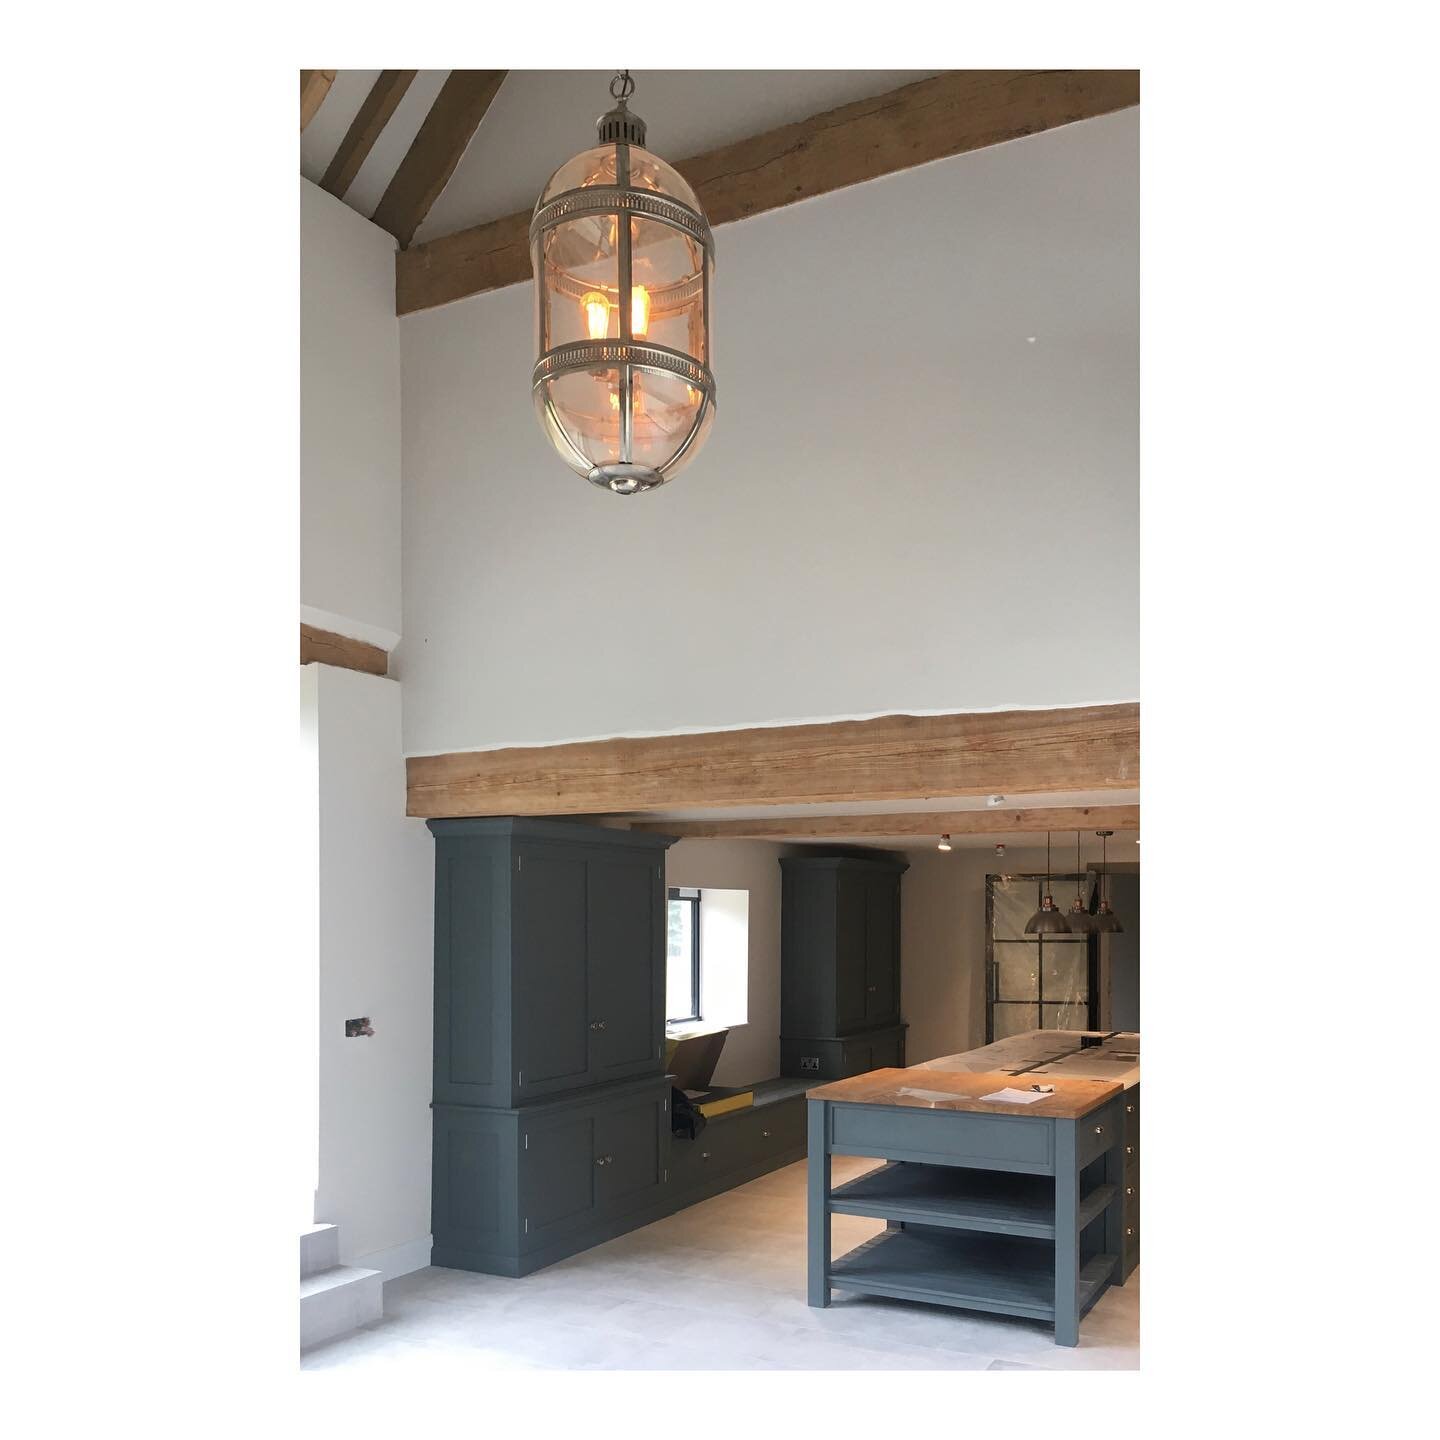 Photo from when the kitchen was coming together over at our Old Watermill project. Such a gorgeous space!..
.
.
.
.
#bespokekitchen #listedbuilding #oxfordshire #countryhome #englishcountryhomes #cotswolds